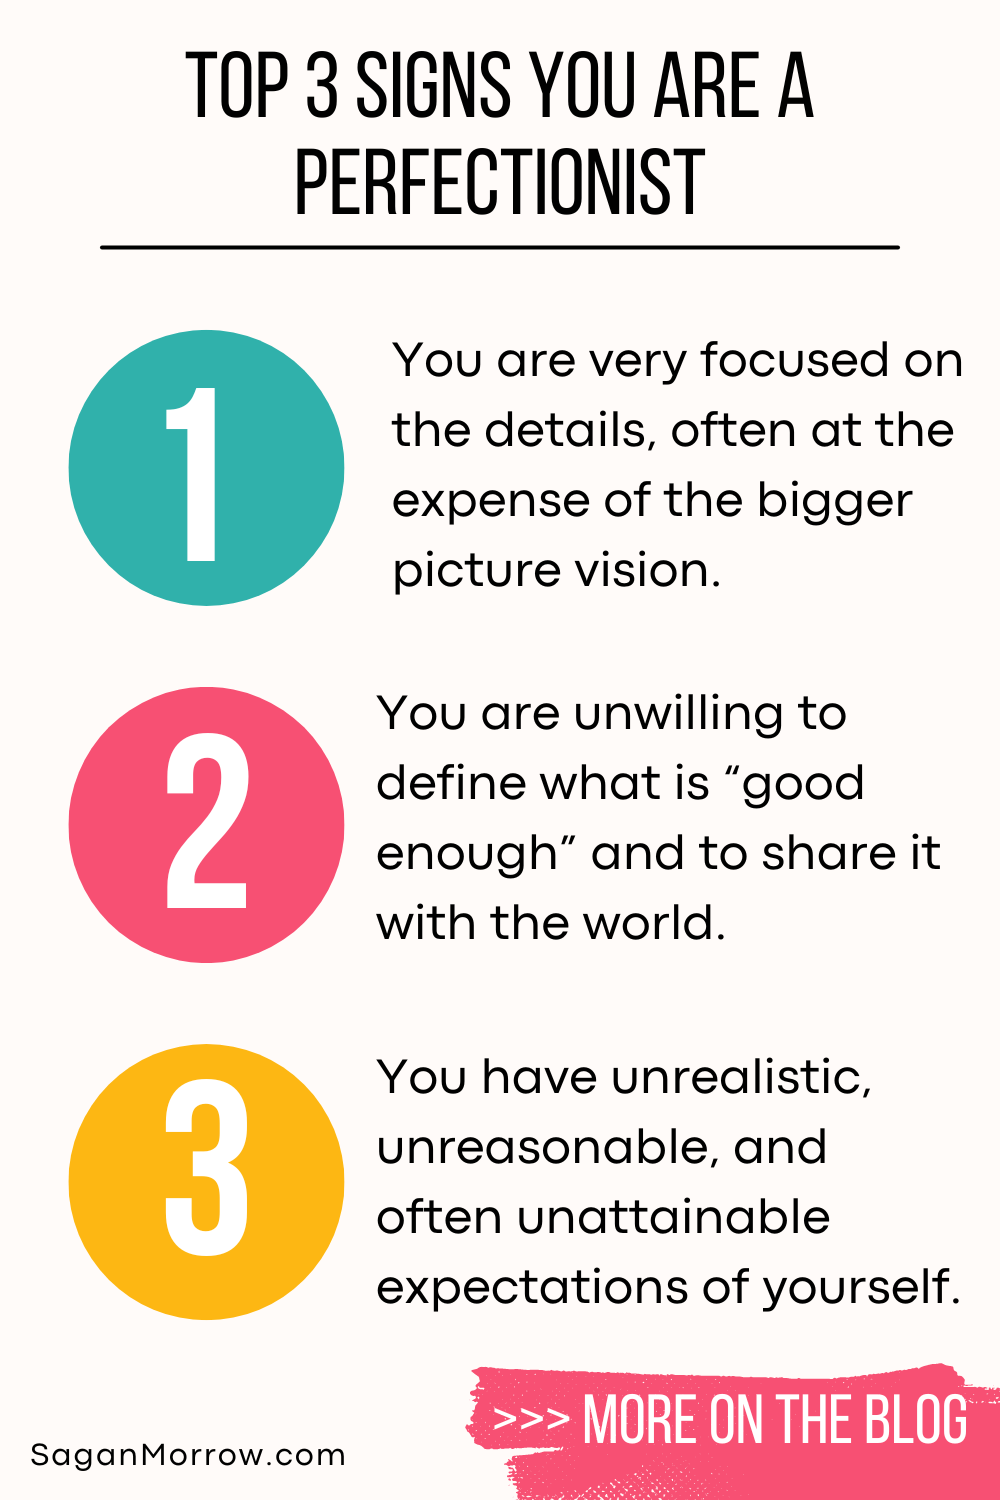 are you a perfectionist - signs you are a perfectionist in this perfectionism infographic